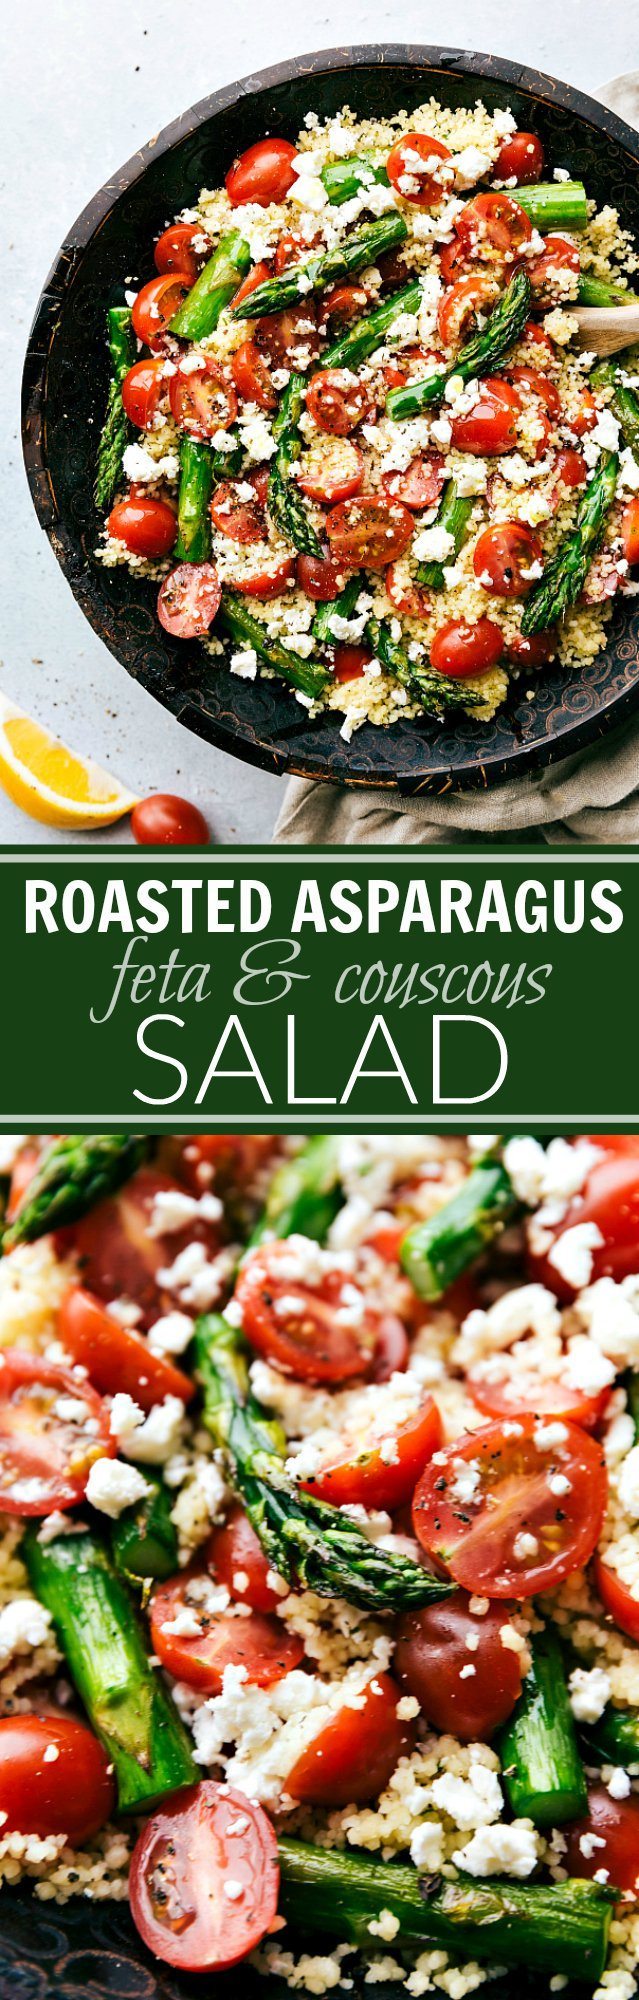 Roasted asparagus, fresh cherry tomatoes, garlicky couscous, and feta cheese with a simple vinaigrette. A great Spring or Easter side dish! via chelseasmessyapron.com